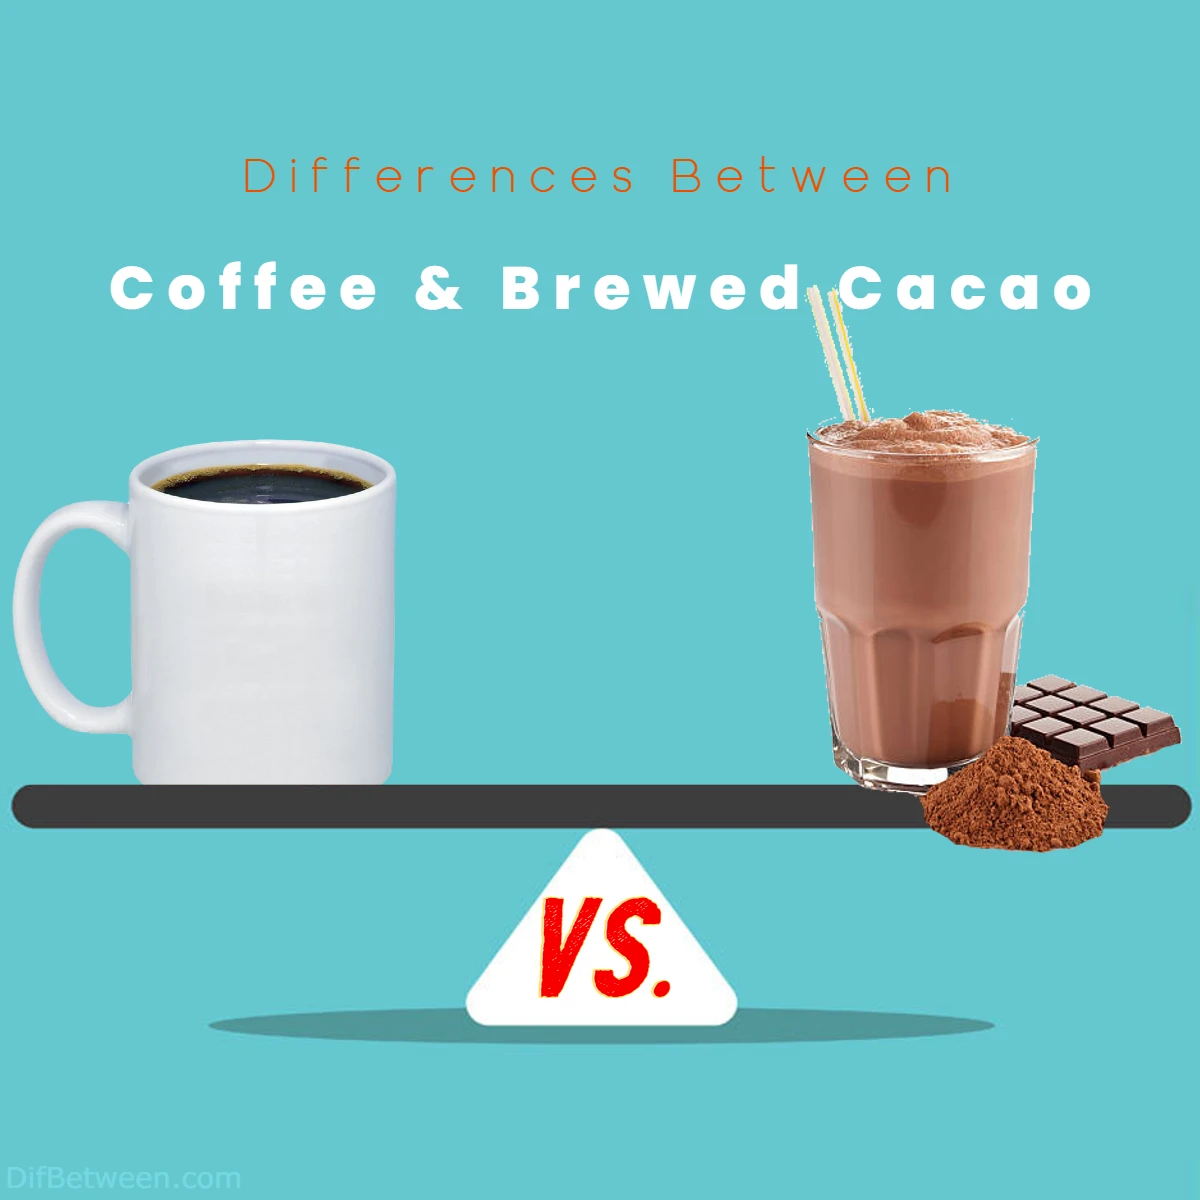 Differences Between Brewed Cacao vs Coffee